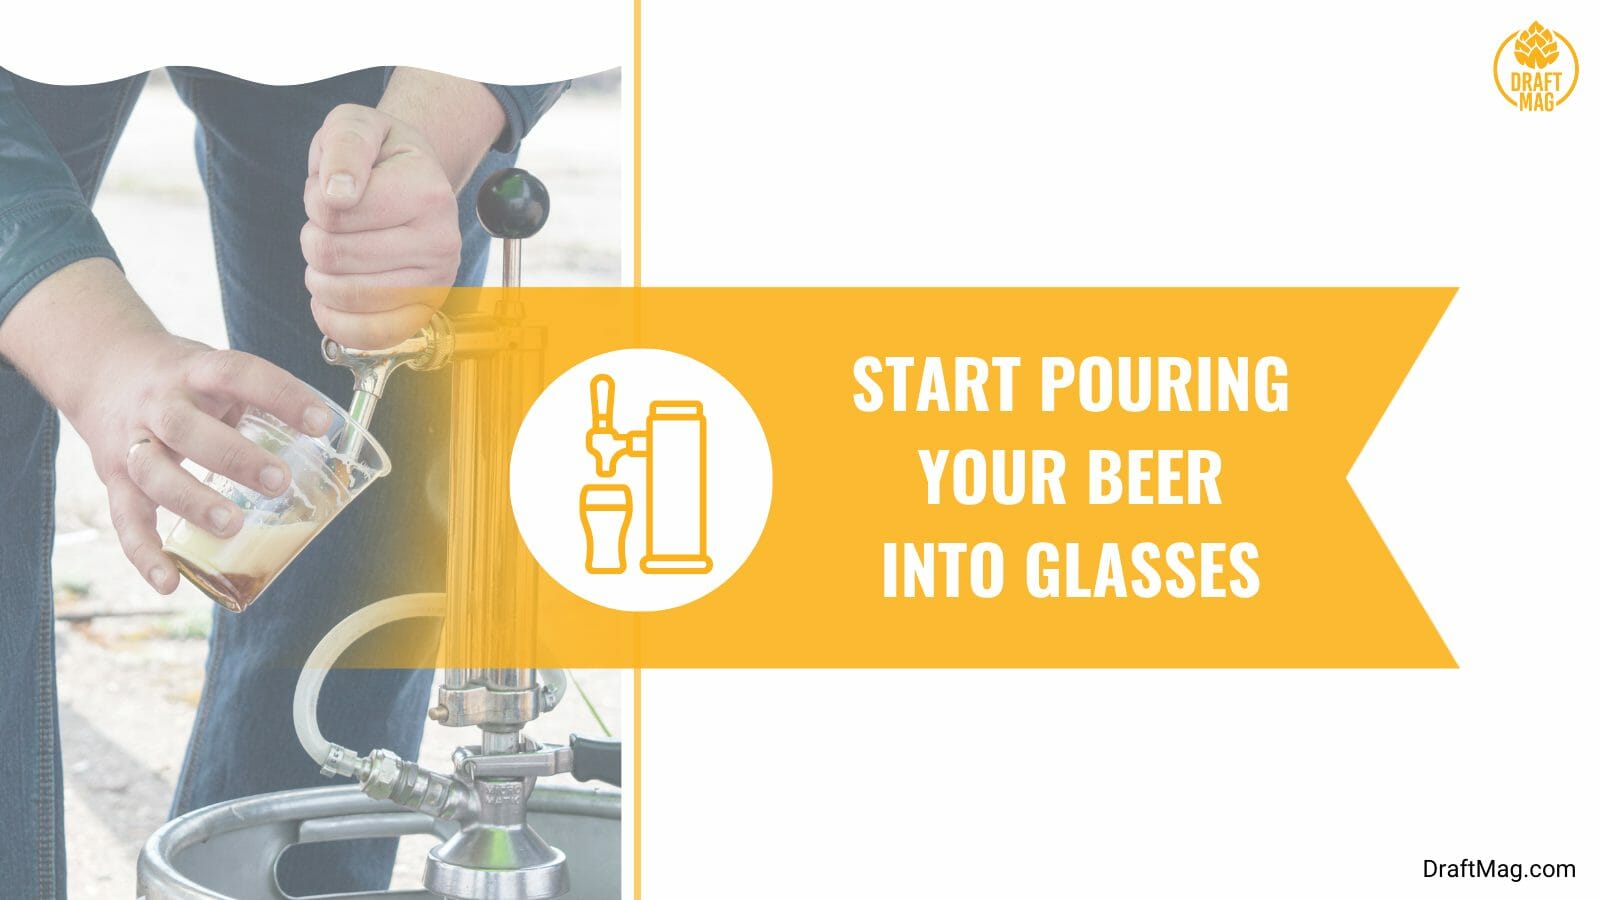 Pour your beer into glasses